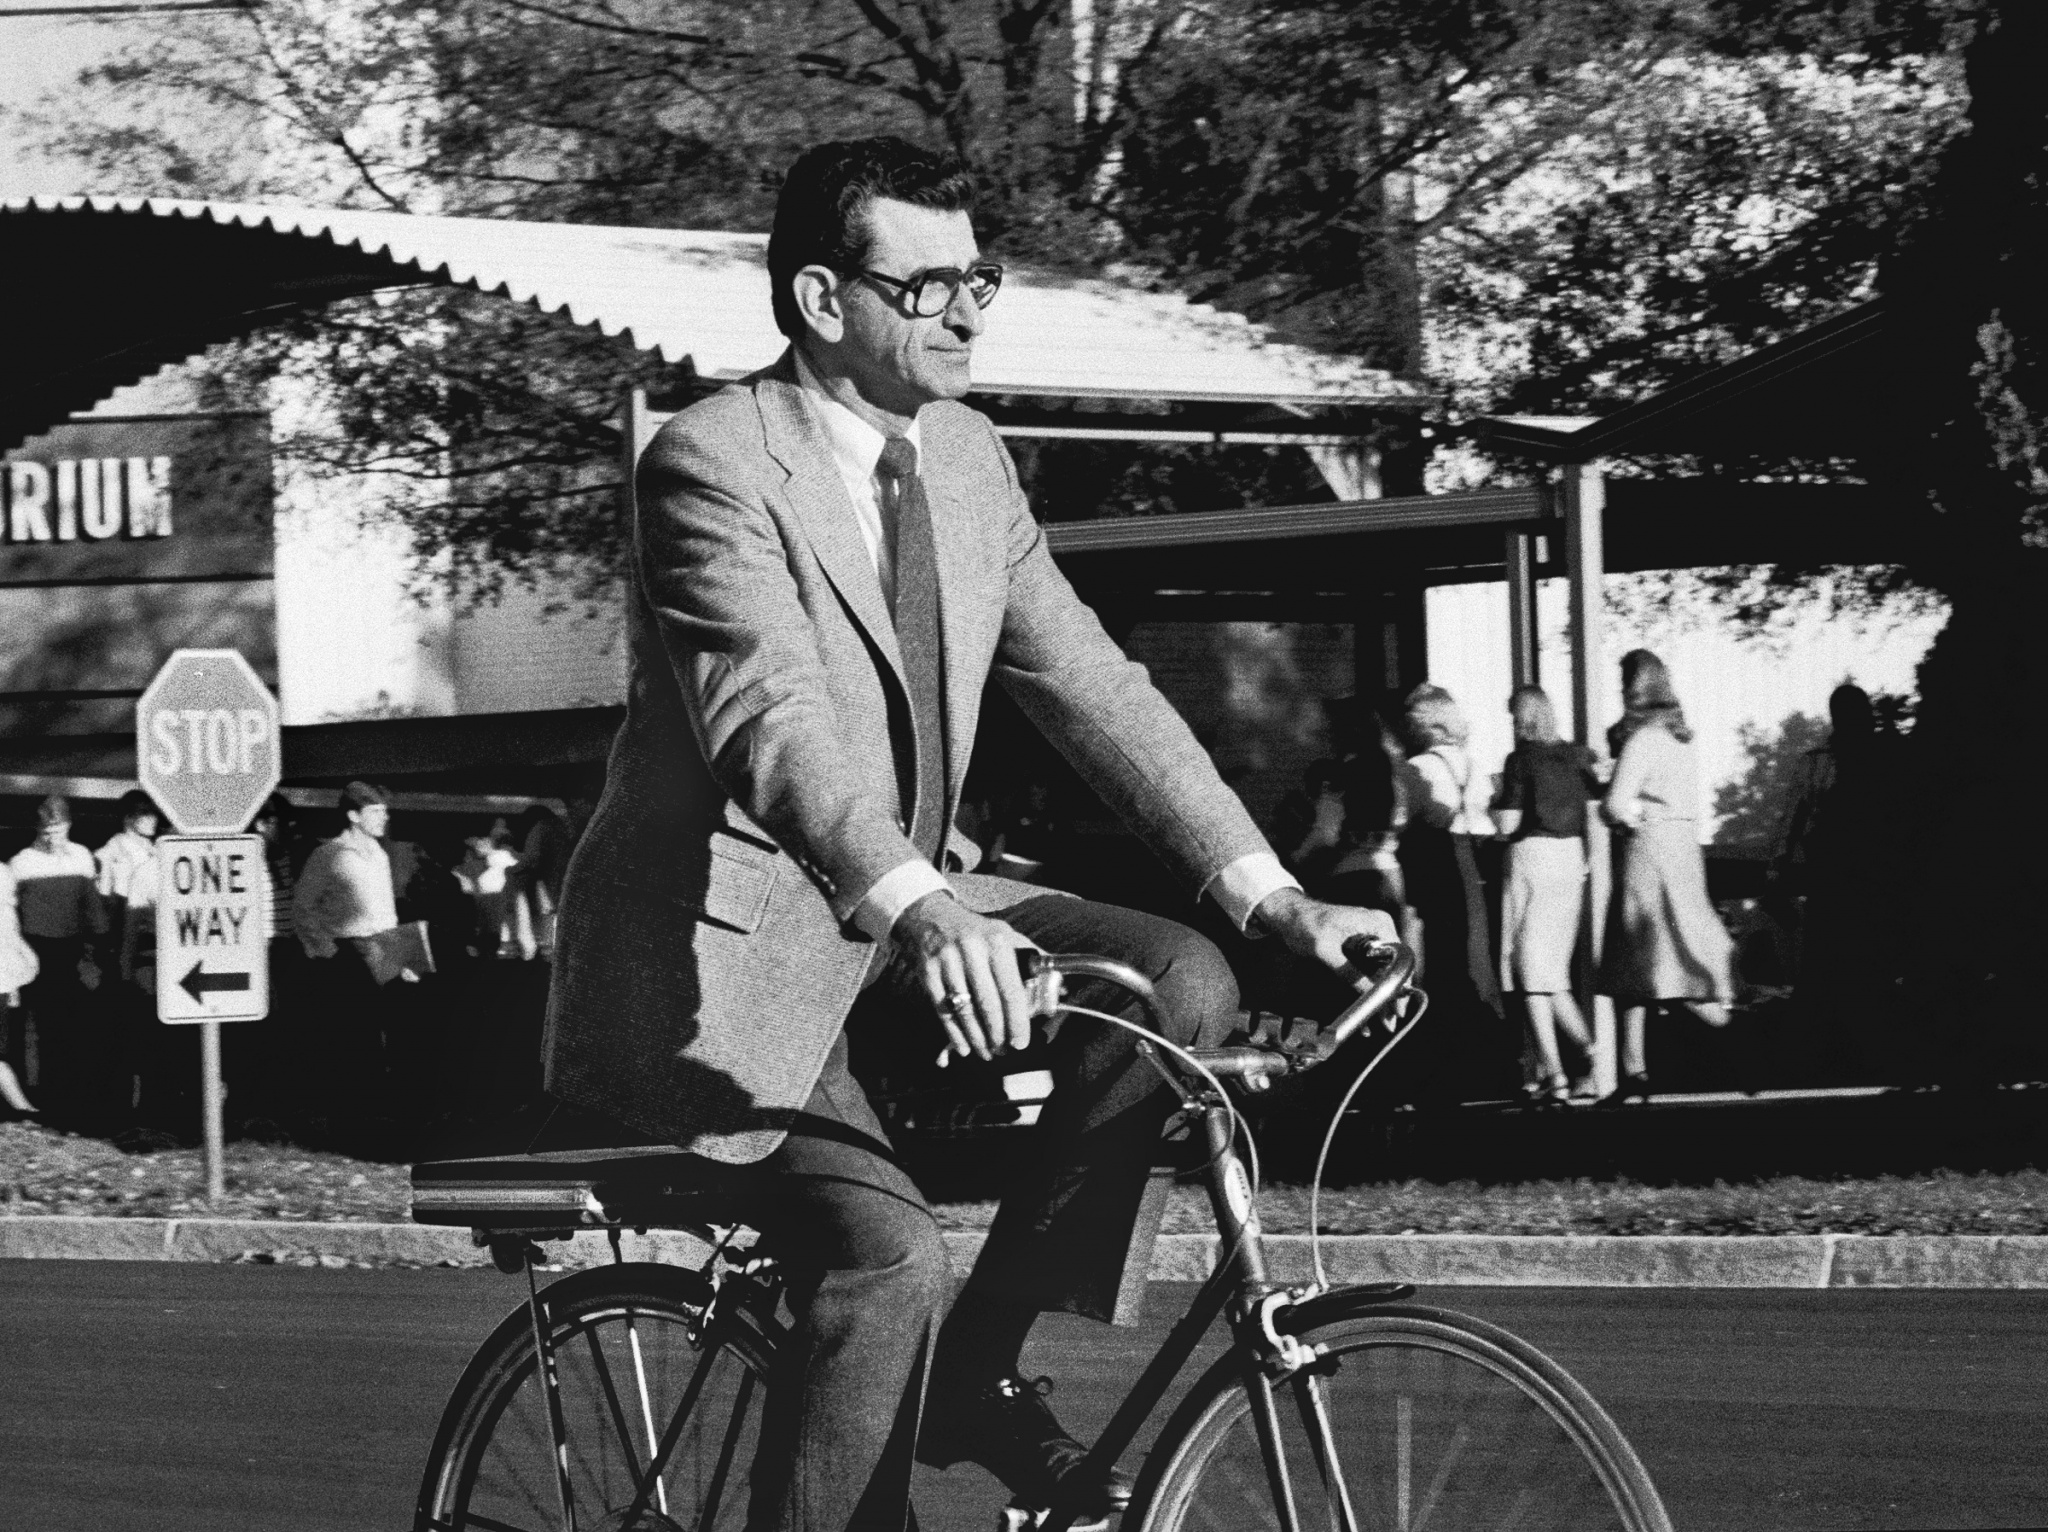 Dr. Ed Panosian riding his bicycle on campus